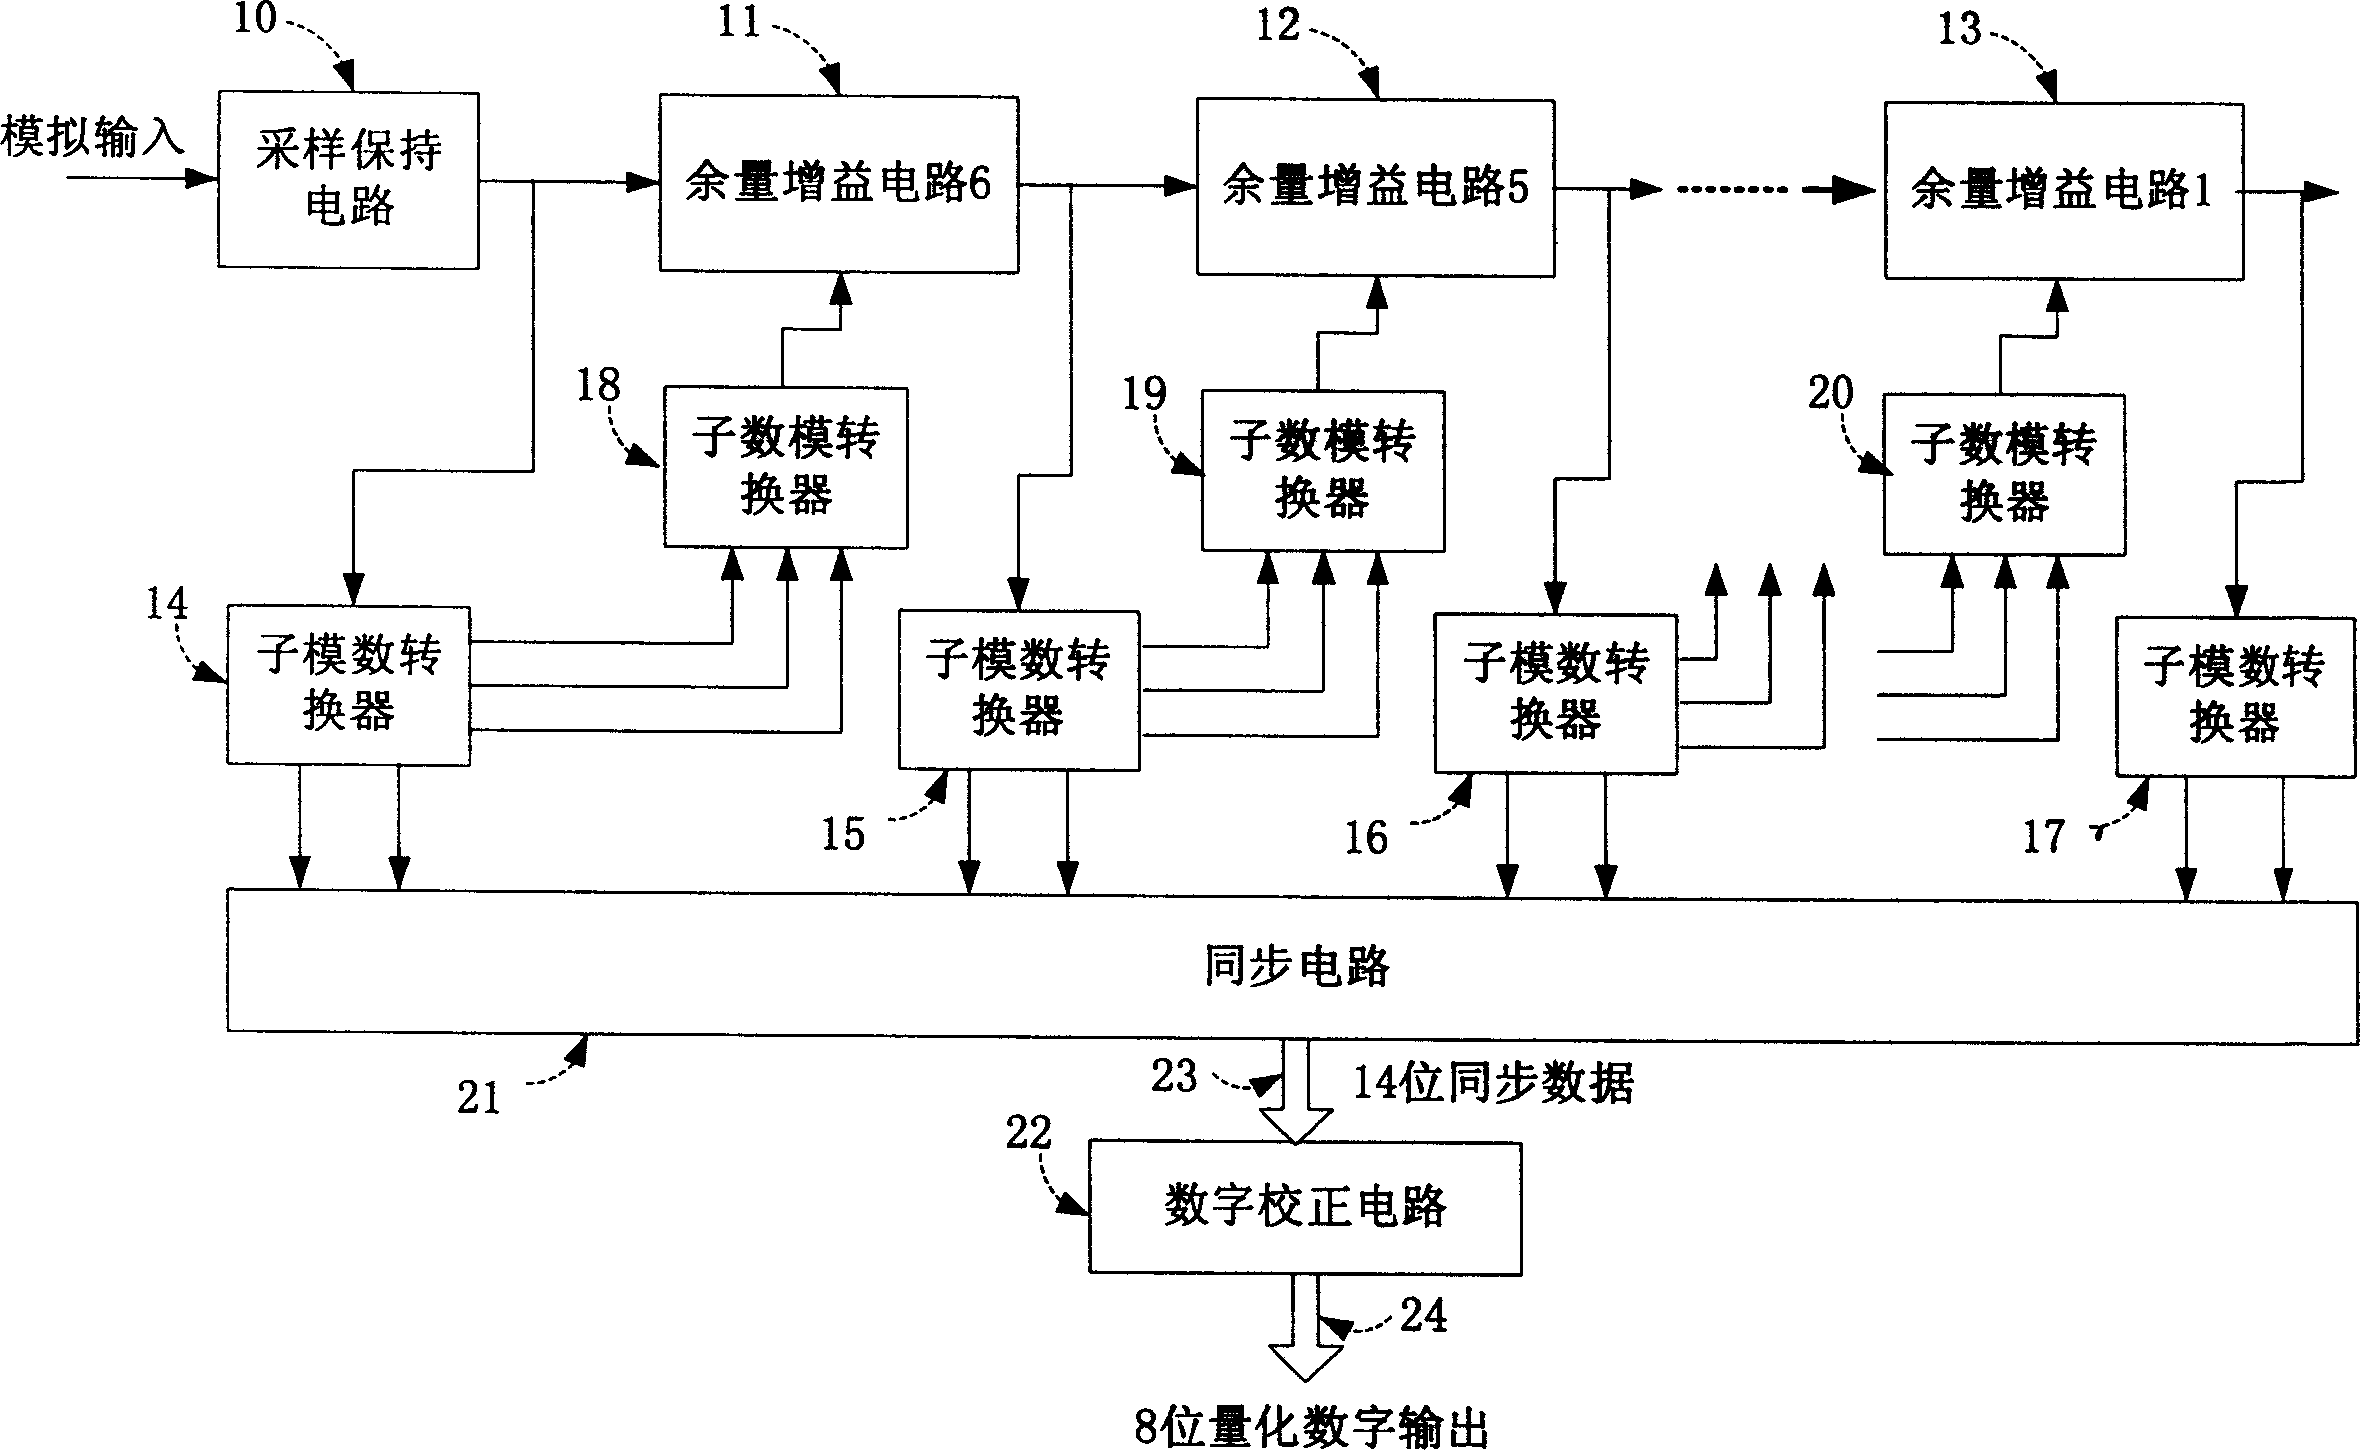 Pipeline structure analogue/digital converter of controlling input common-mode drift